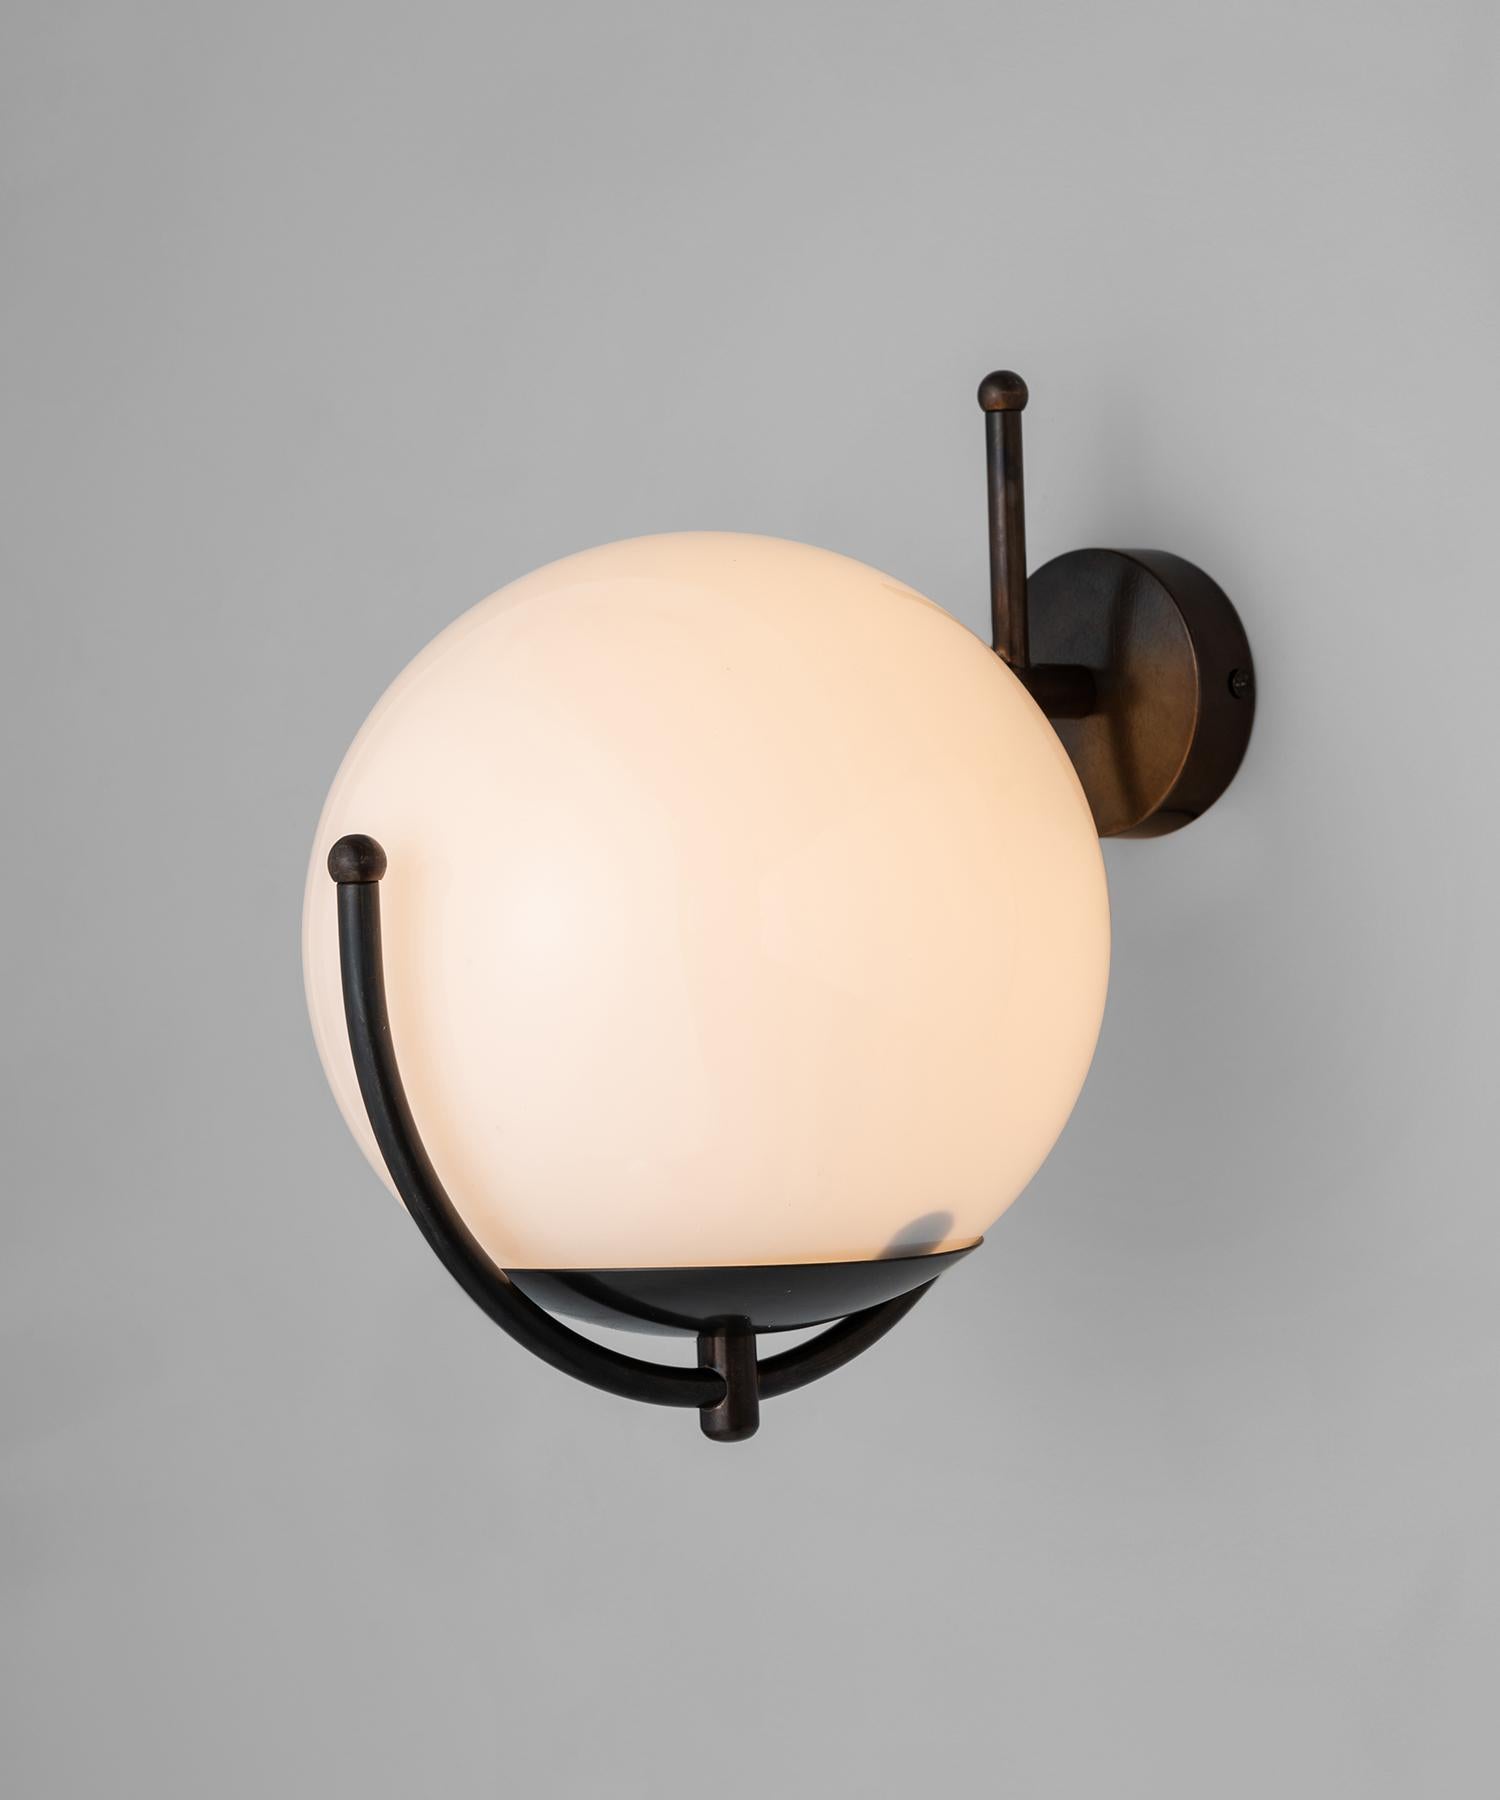 Hand patinated brass arm with opaline globe shade.

Made in Italy

Measures: 11.25